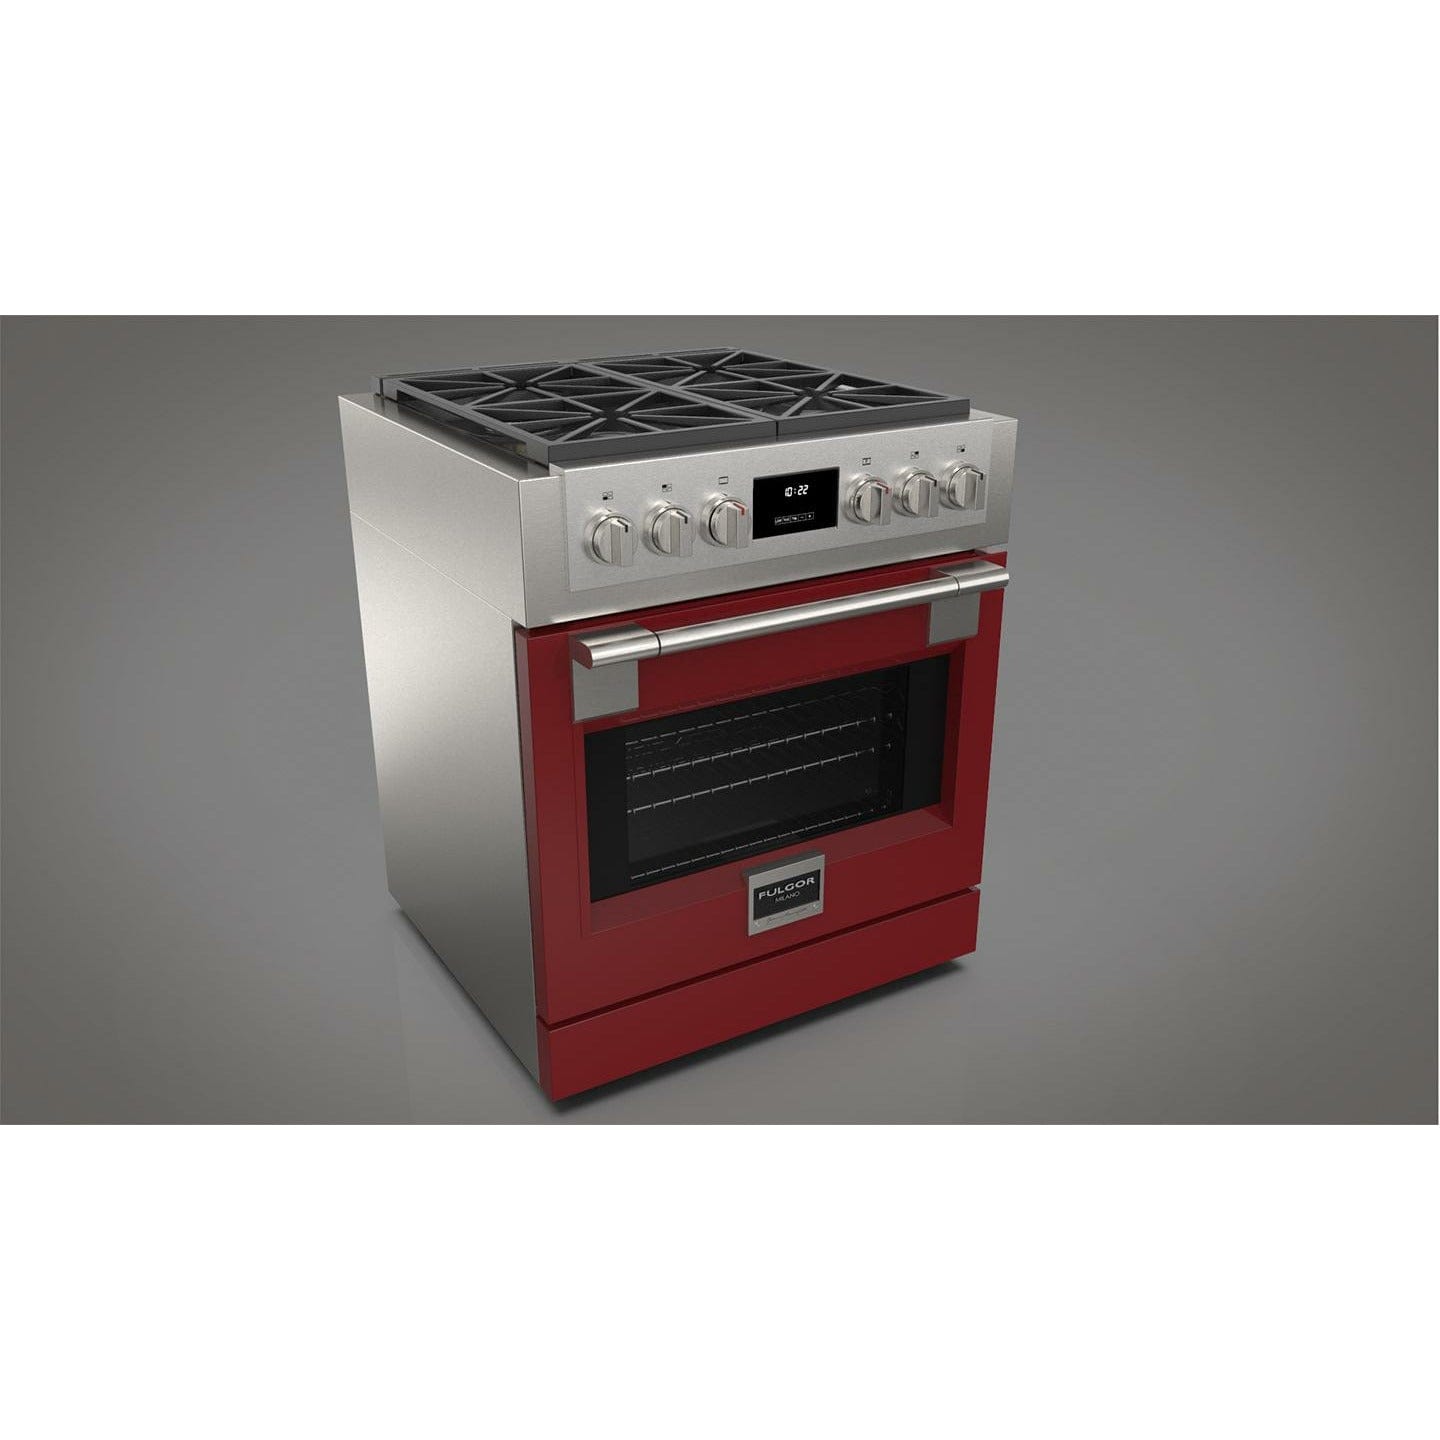 Fulgor Milano 30" Professional All Gas Range with 4 Dual-Flame Burners, 4.4 cu. ft. Capacity w/ Stainless Steel - F6PGR304S2 Ranges Luxury Appliances Direct